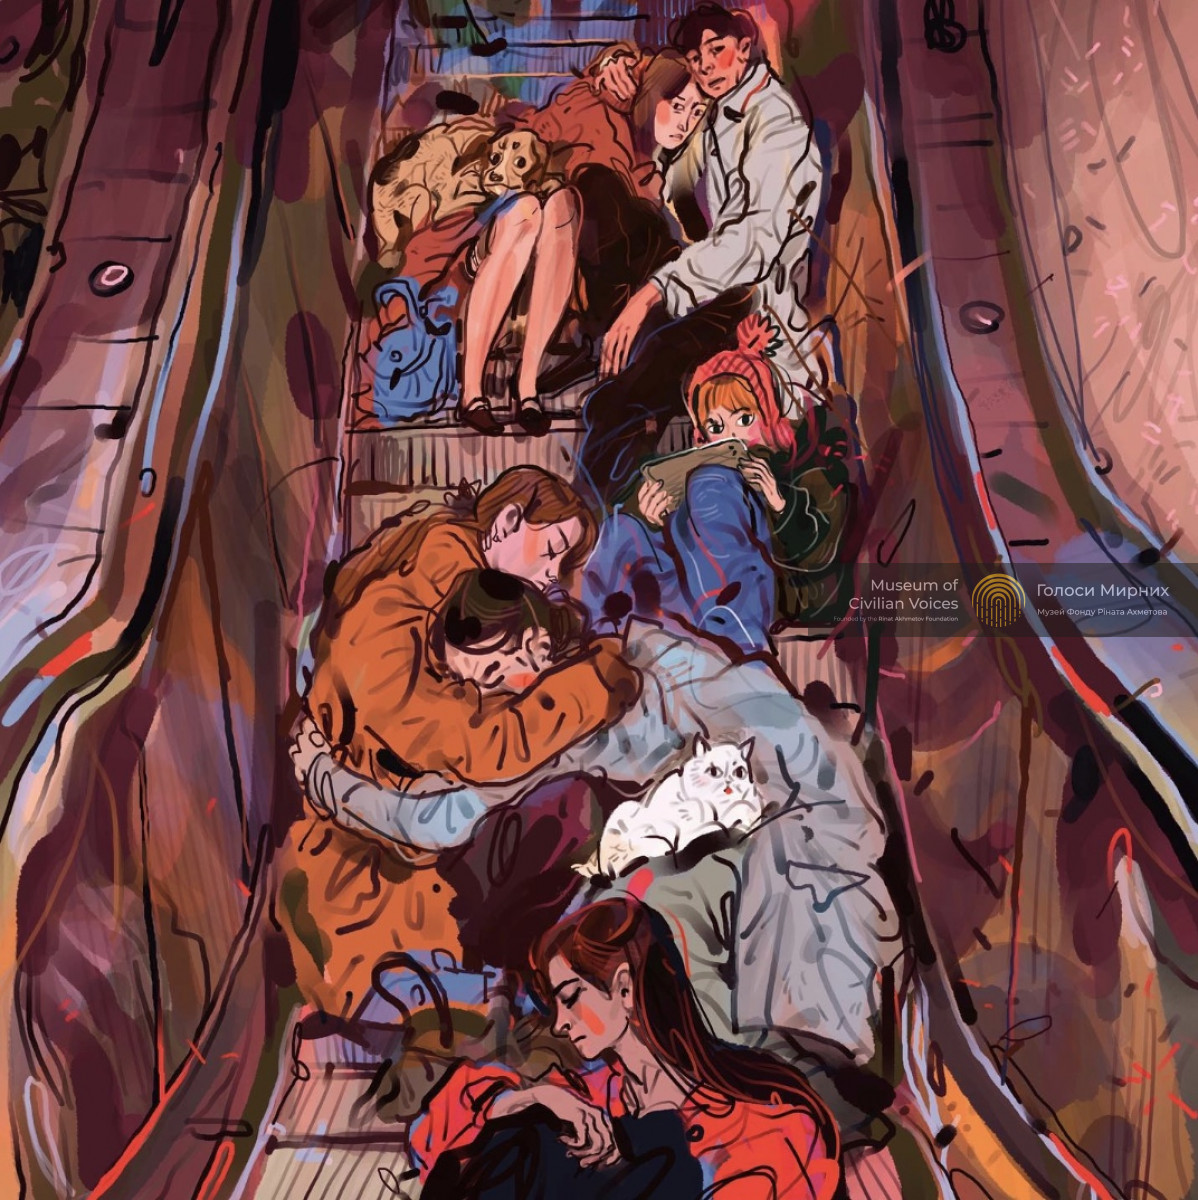 People on the subway escalator during another 4-6 hour air raid alert